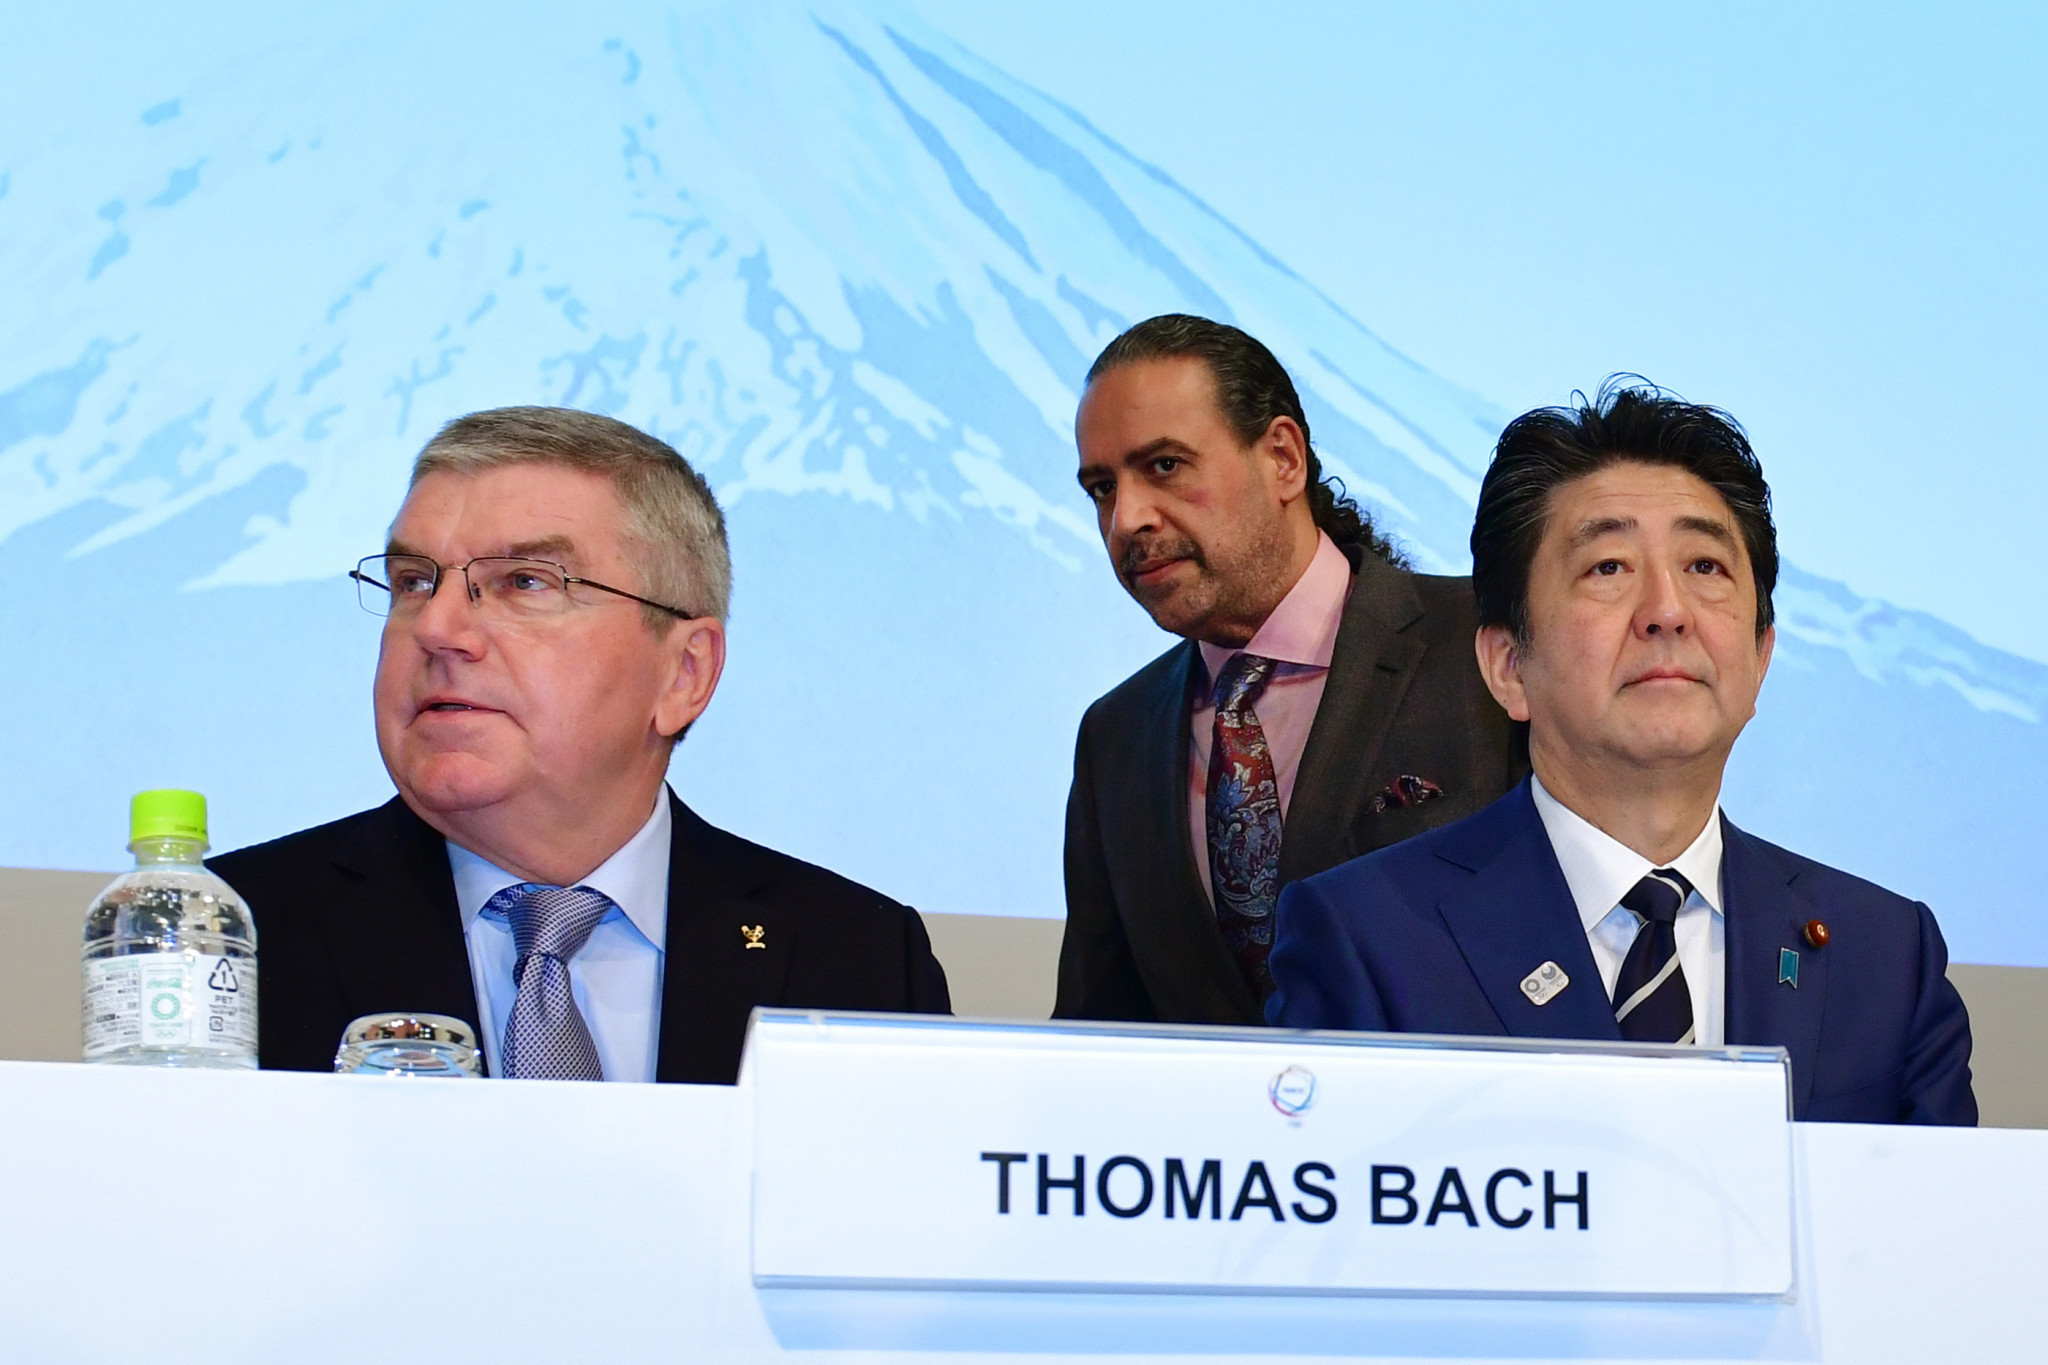 IOC President Thomas Bach personally asked Sheikh to temporarily stand aside as head of the umbrella body last week ©Getty Images